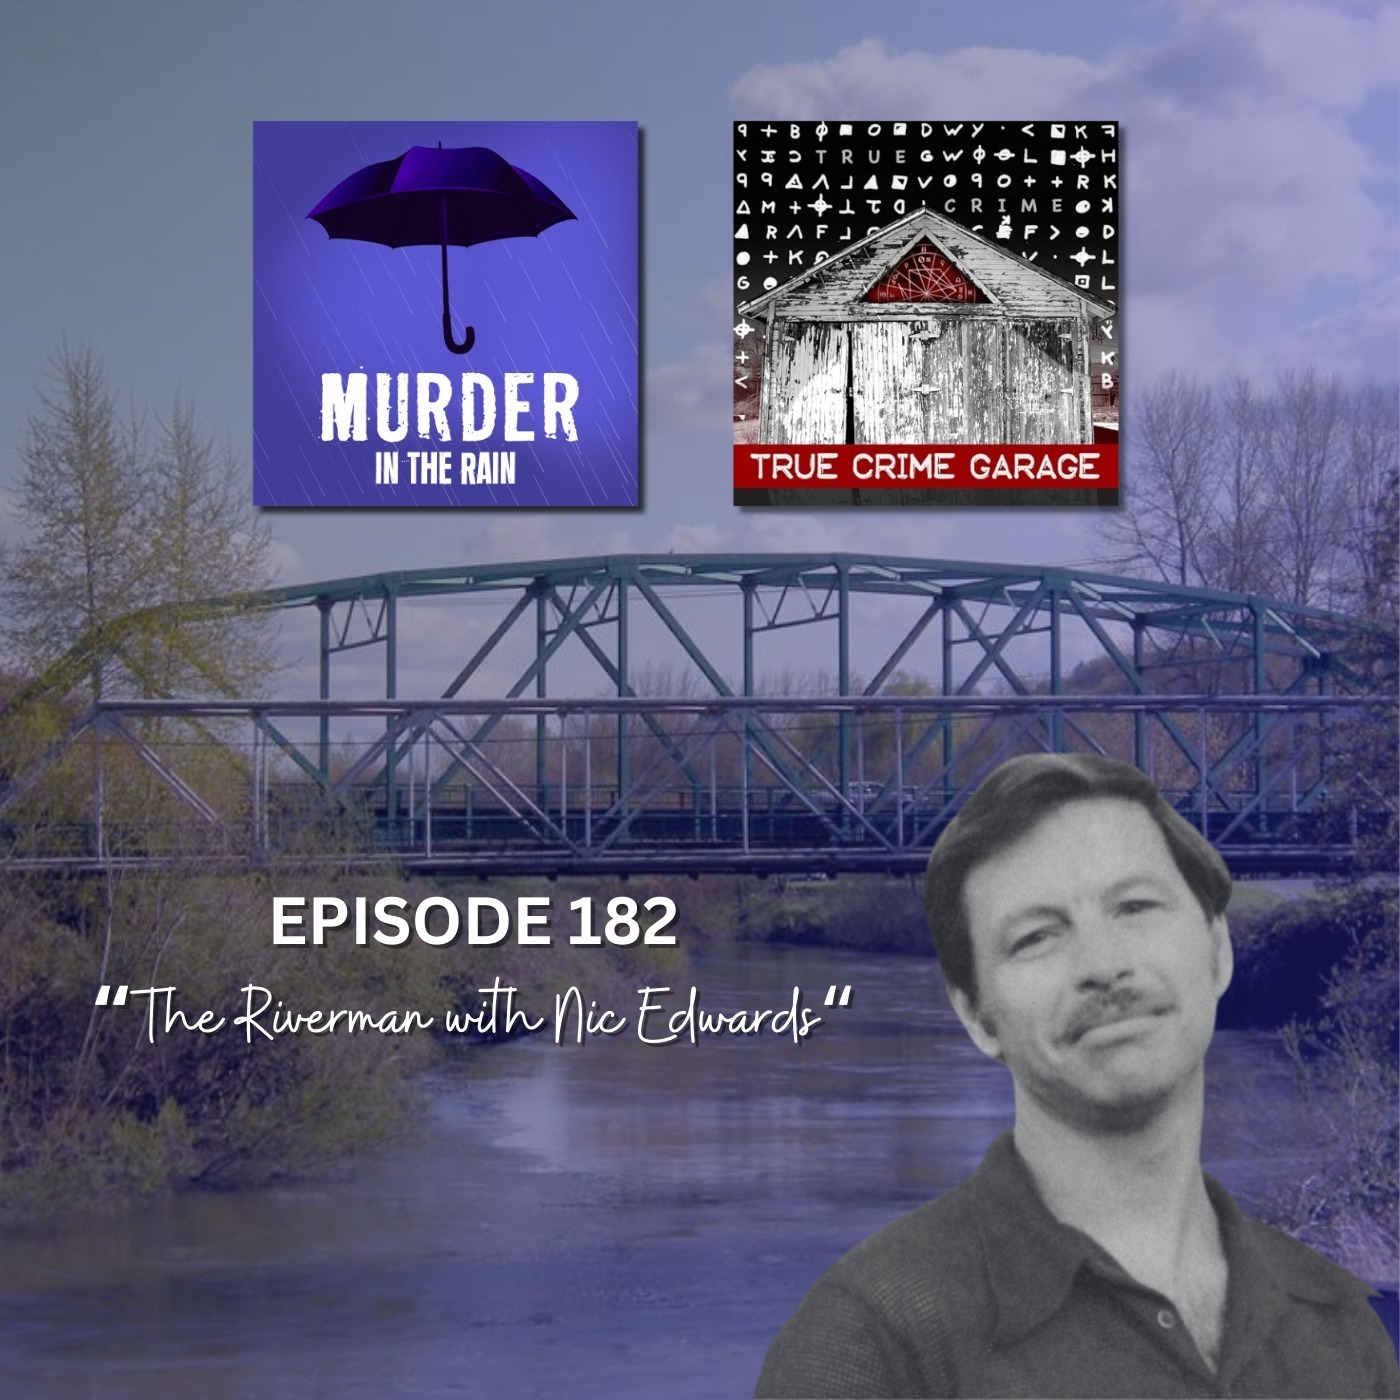 Green River Killer Part 2: The Riverman with Nic Edwards